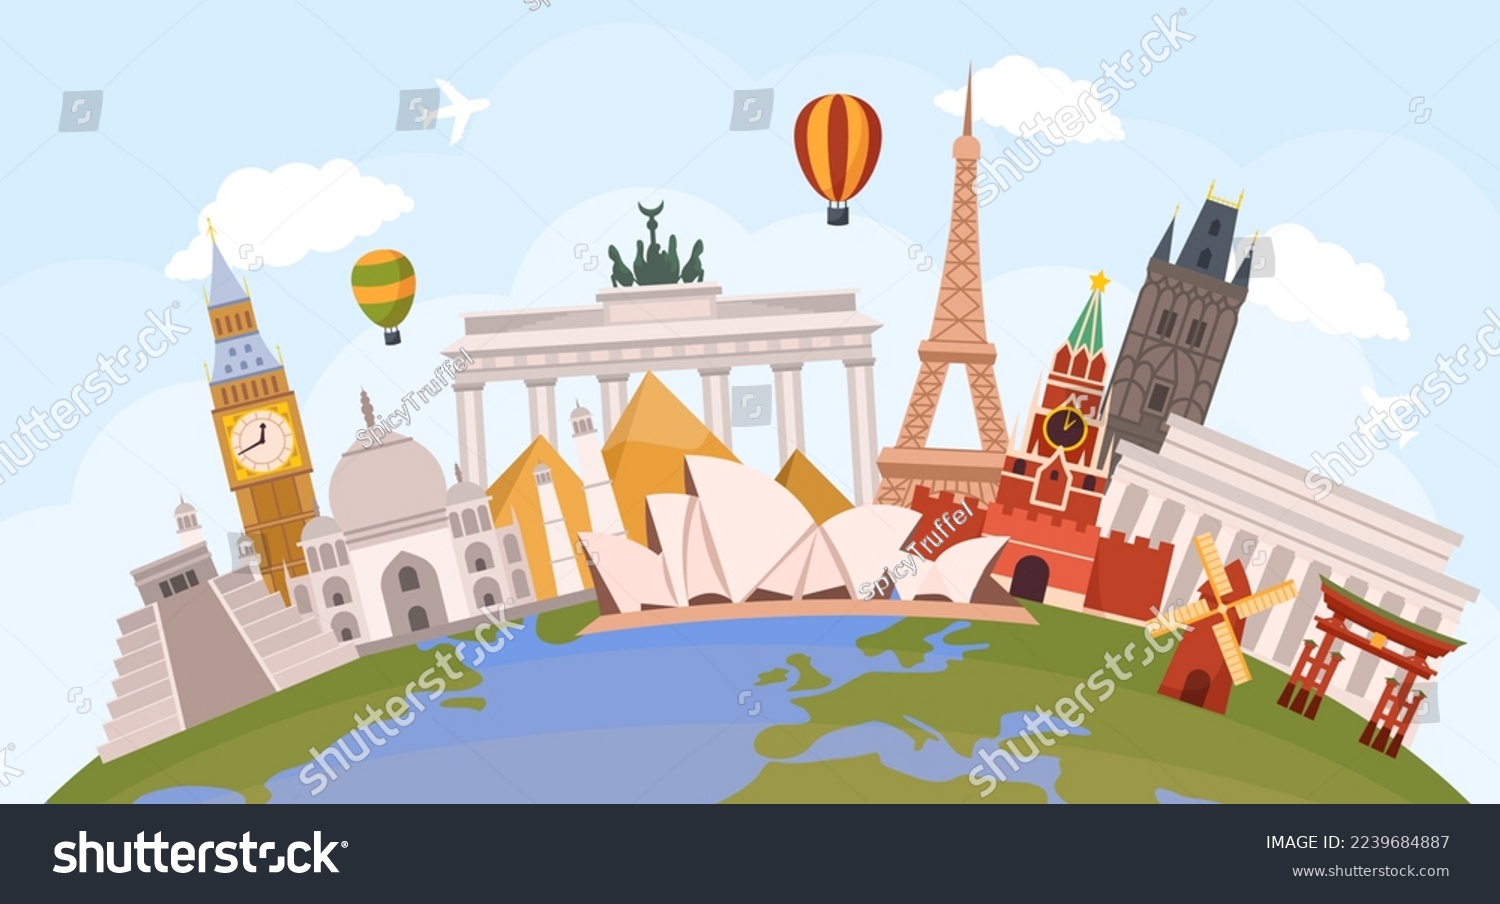 SVG of World landmarks. Global travel. Architecture and monuments. Tourists in abroad country. Famous culture heritage. City tour. Earth planet and historic buildings. Vector illustration concept svg